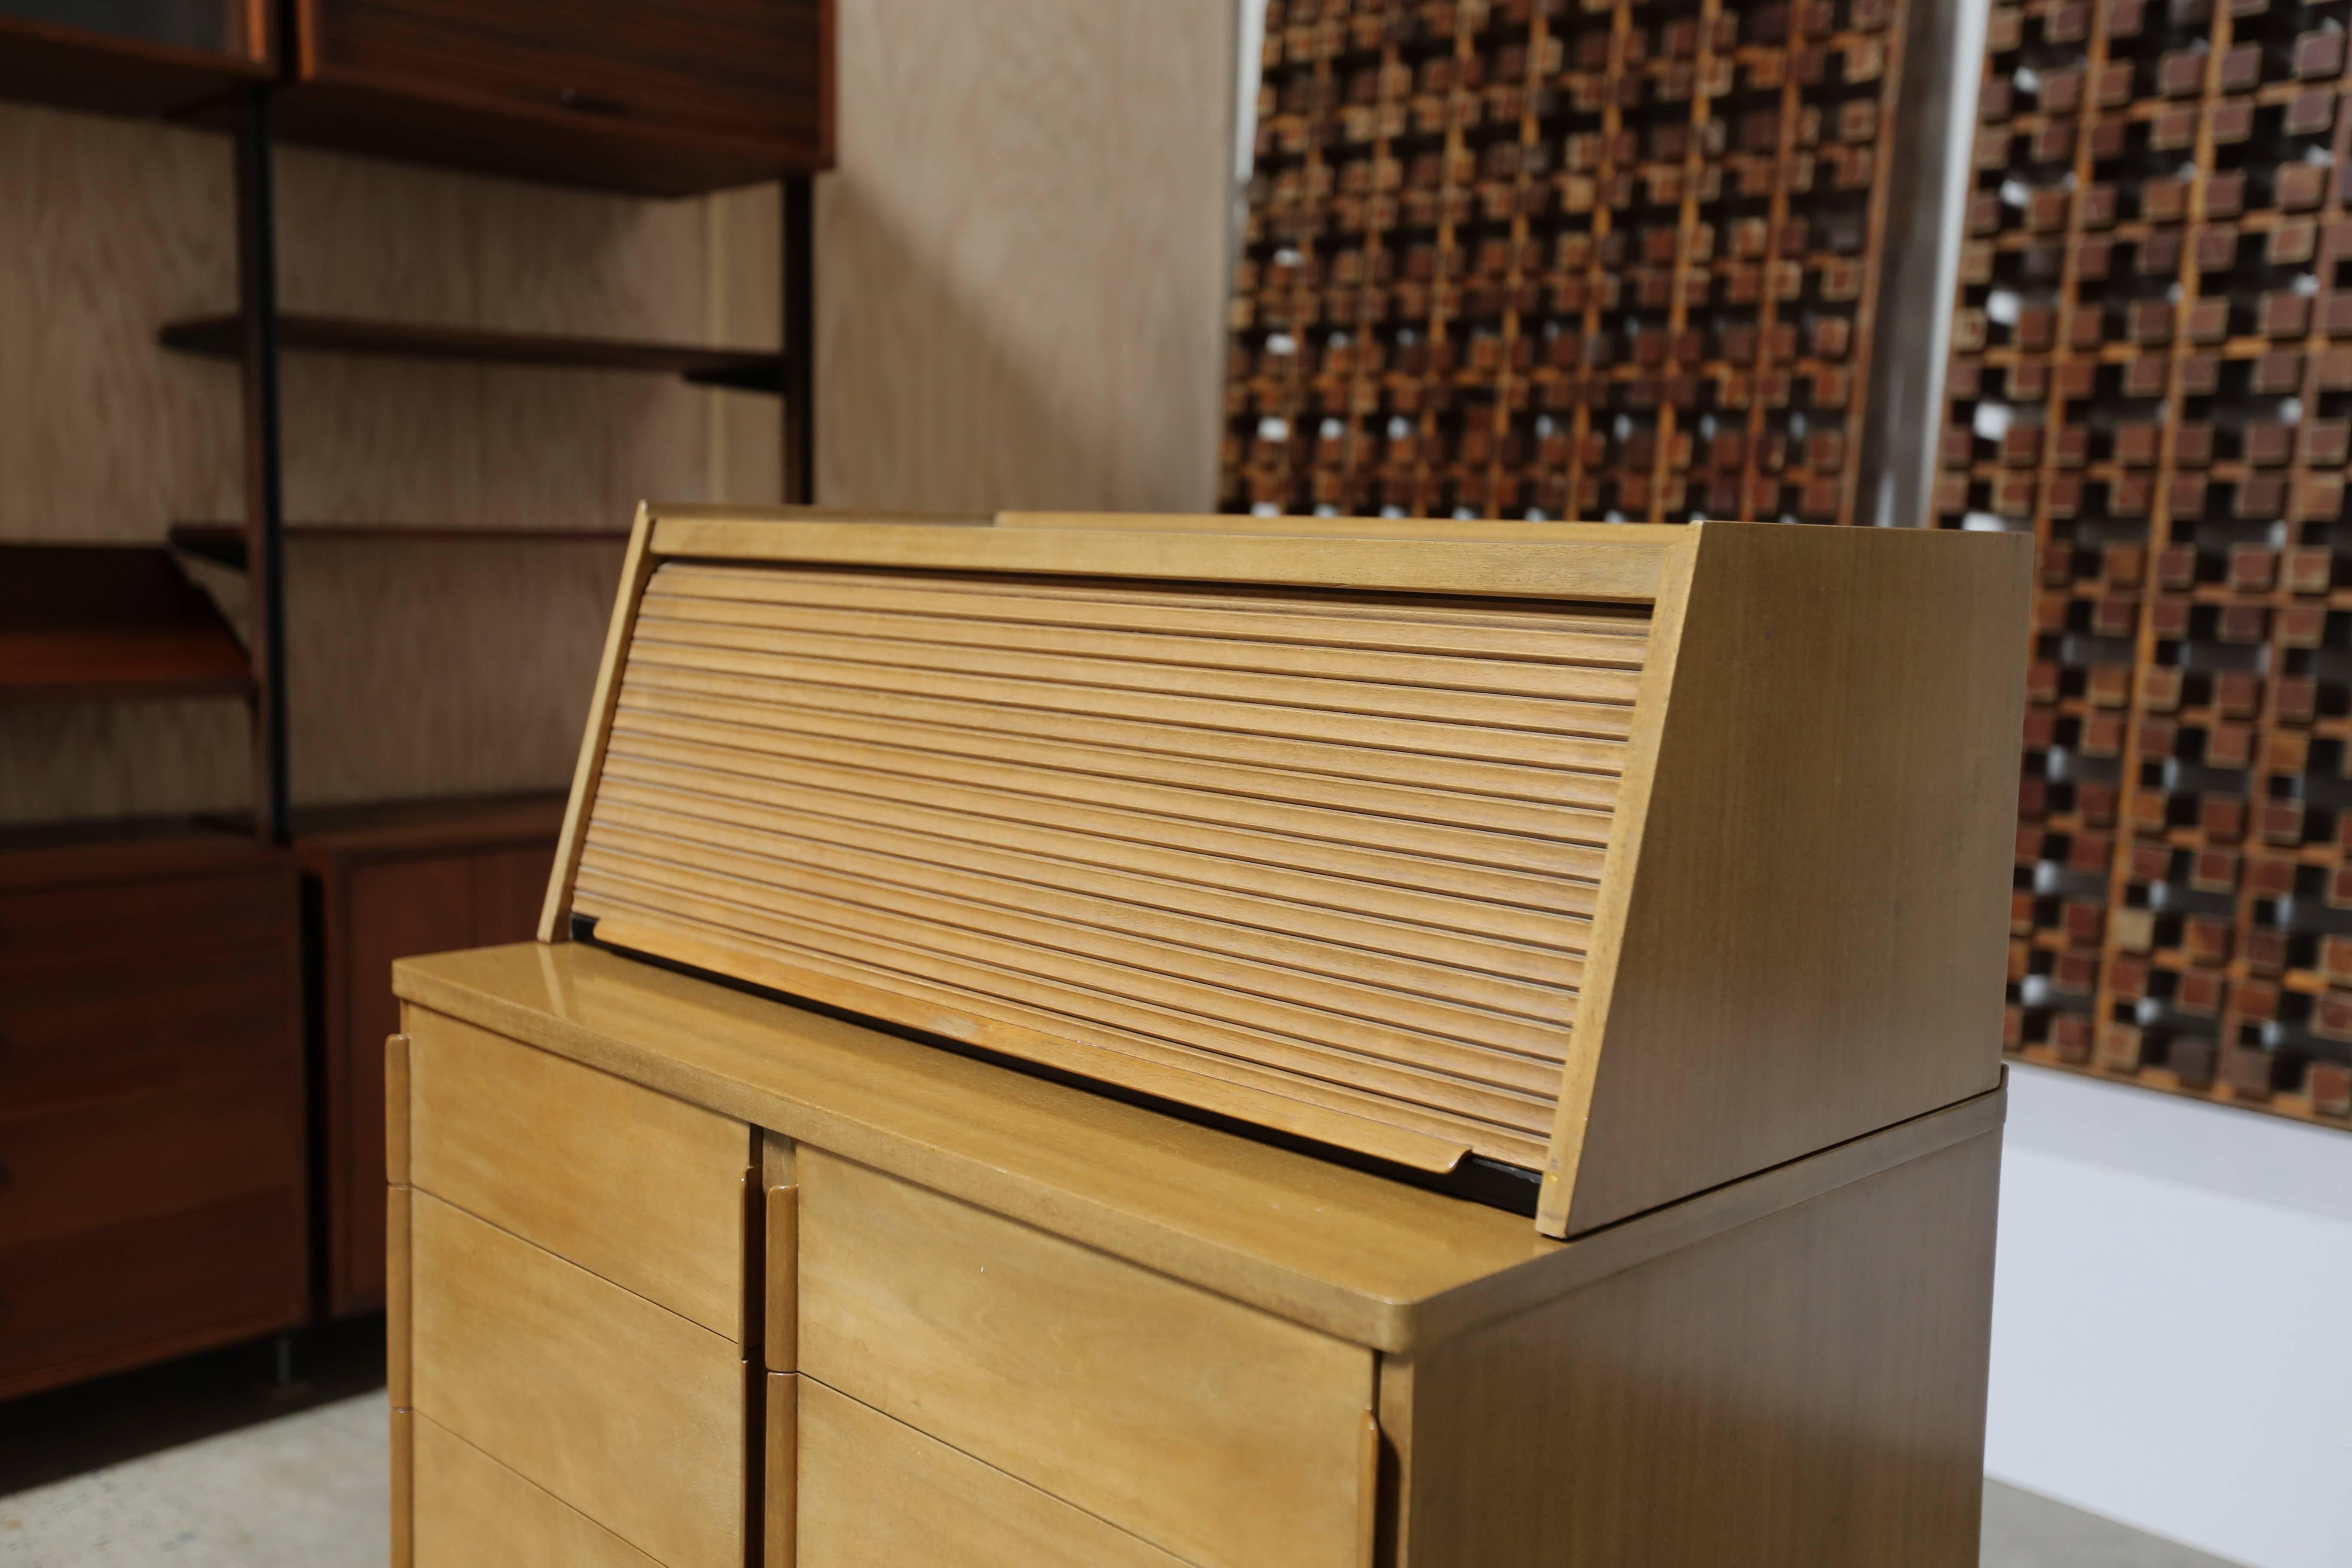 Chest of drawers by Edward Wormley for Dunbar. Rare removable tambour door top storage. Mahogany with rosewood legs.